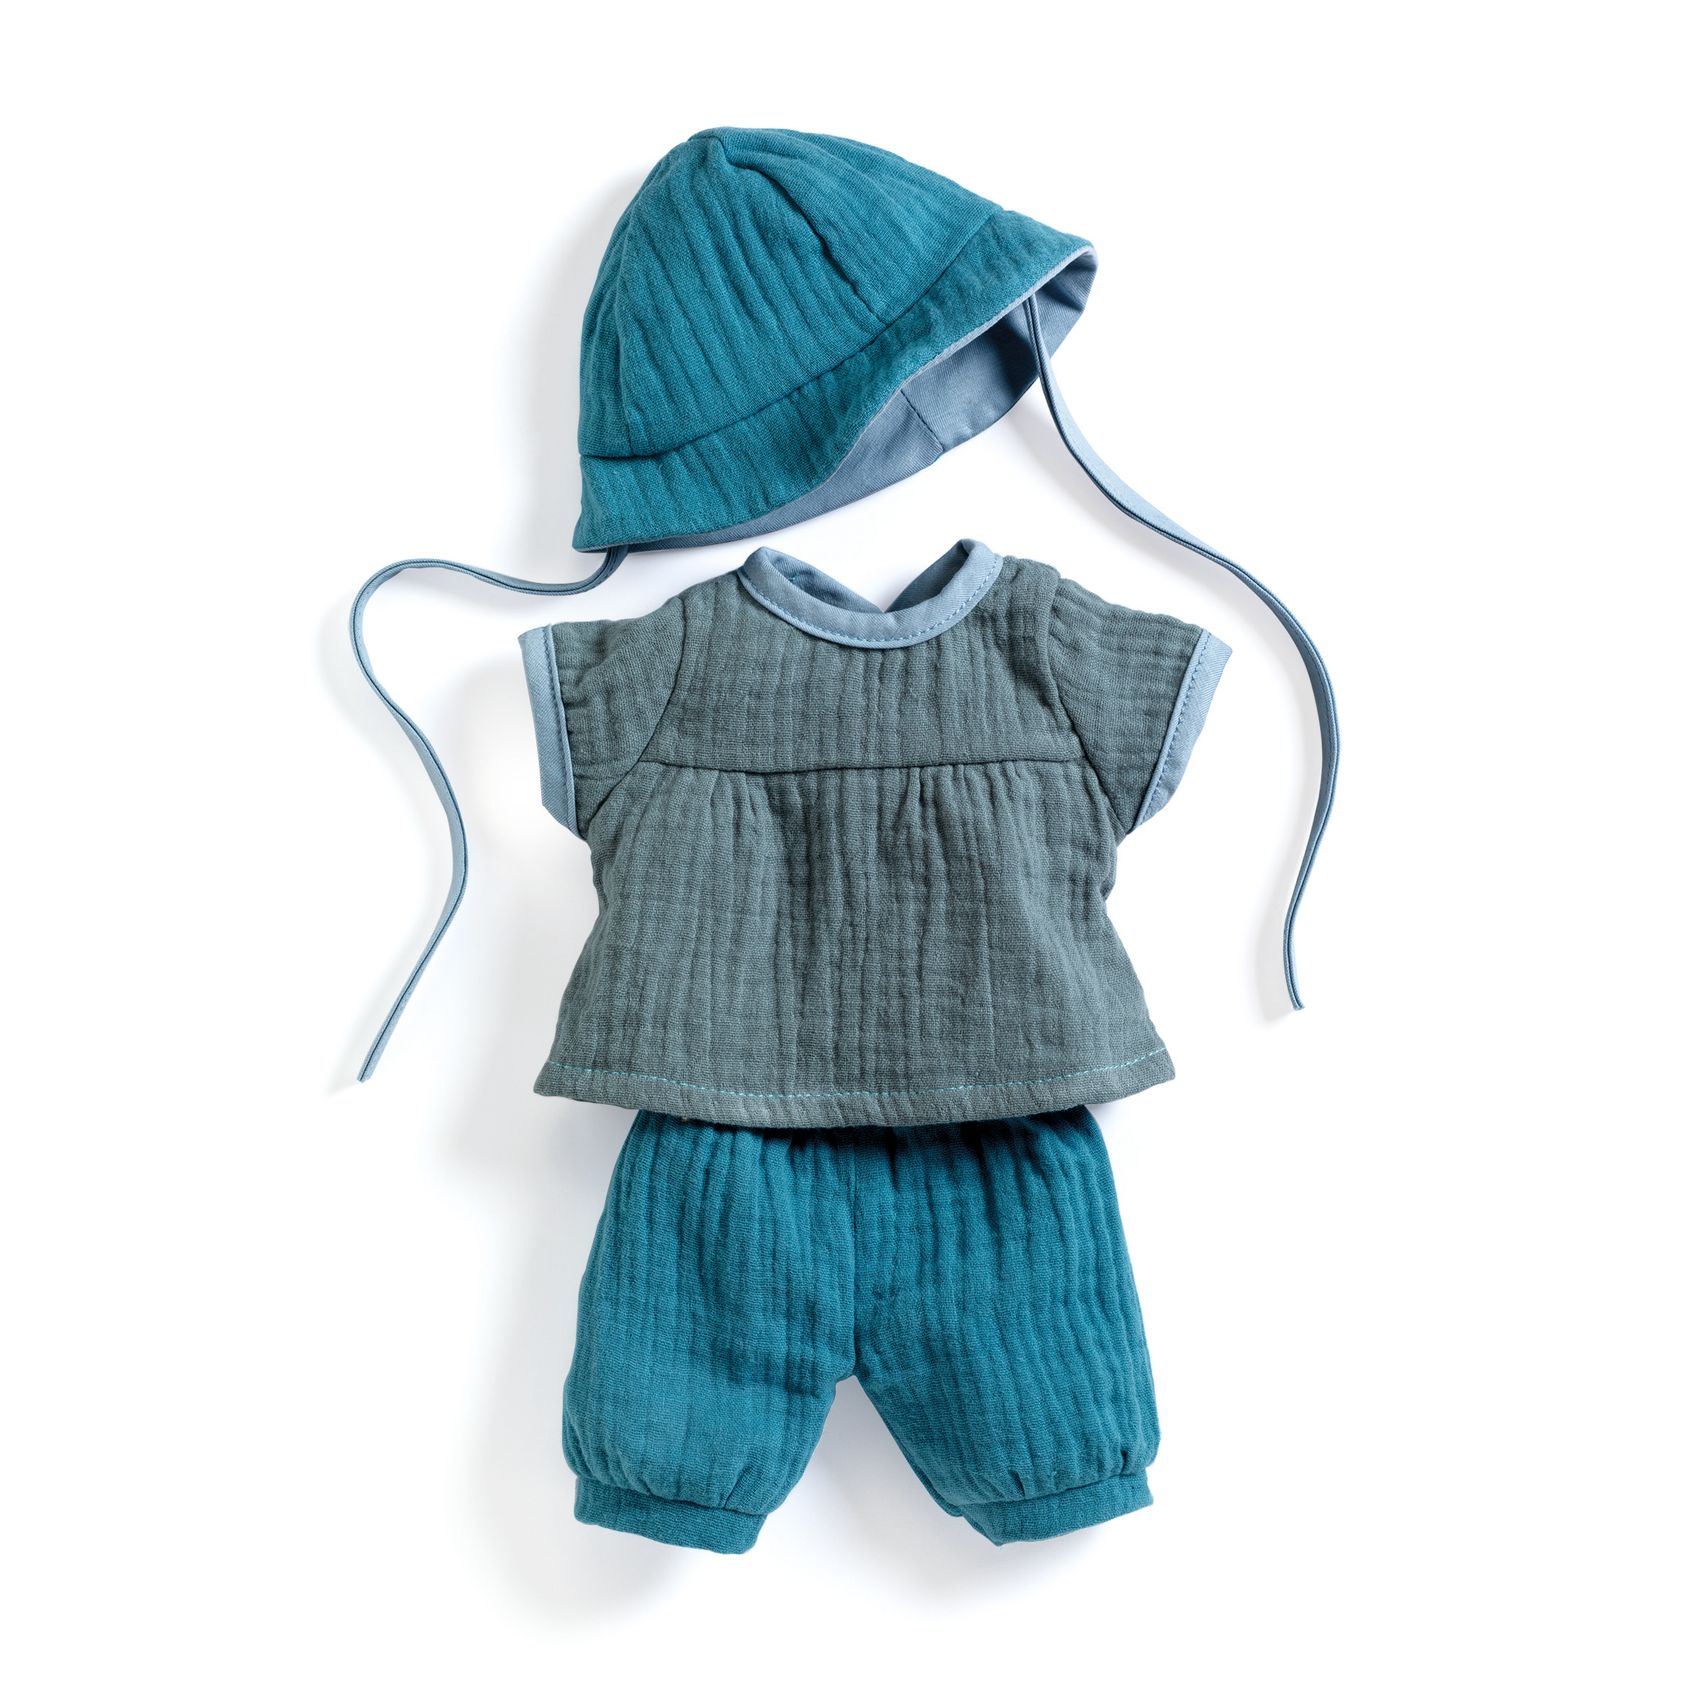 Summer outfit for baby doll Poméa by Djeco